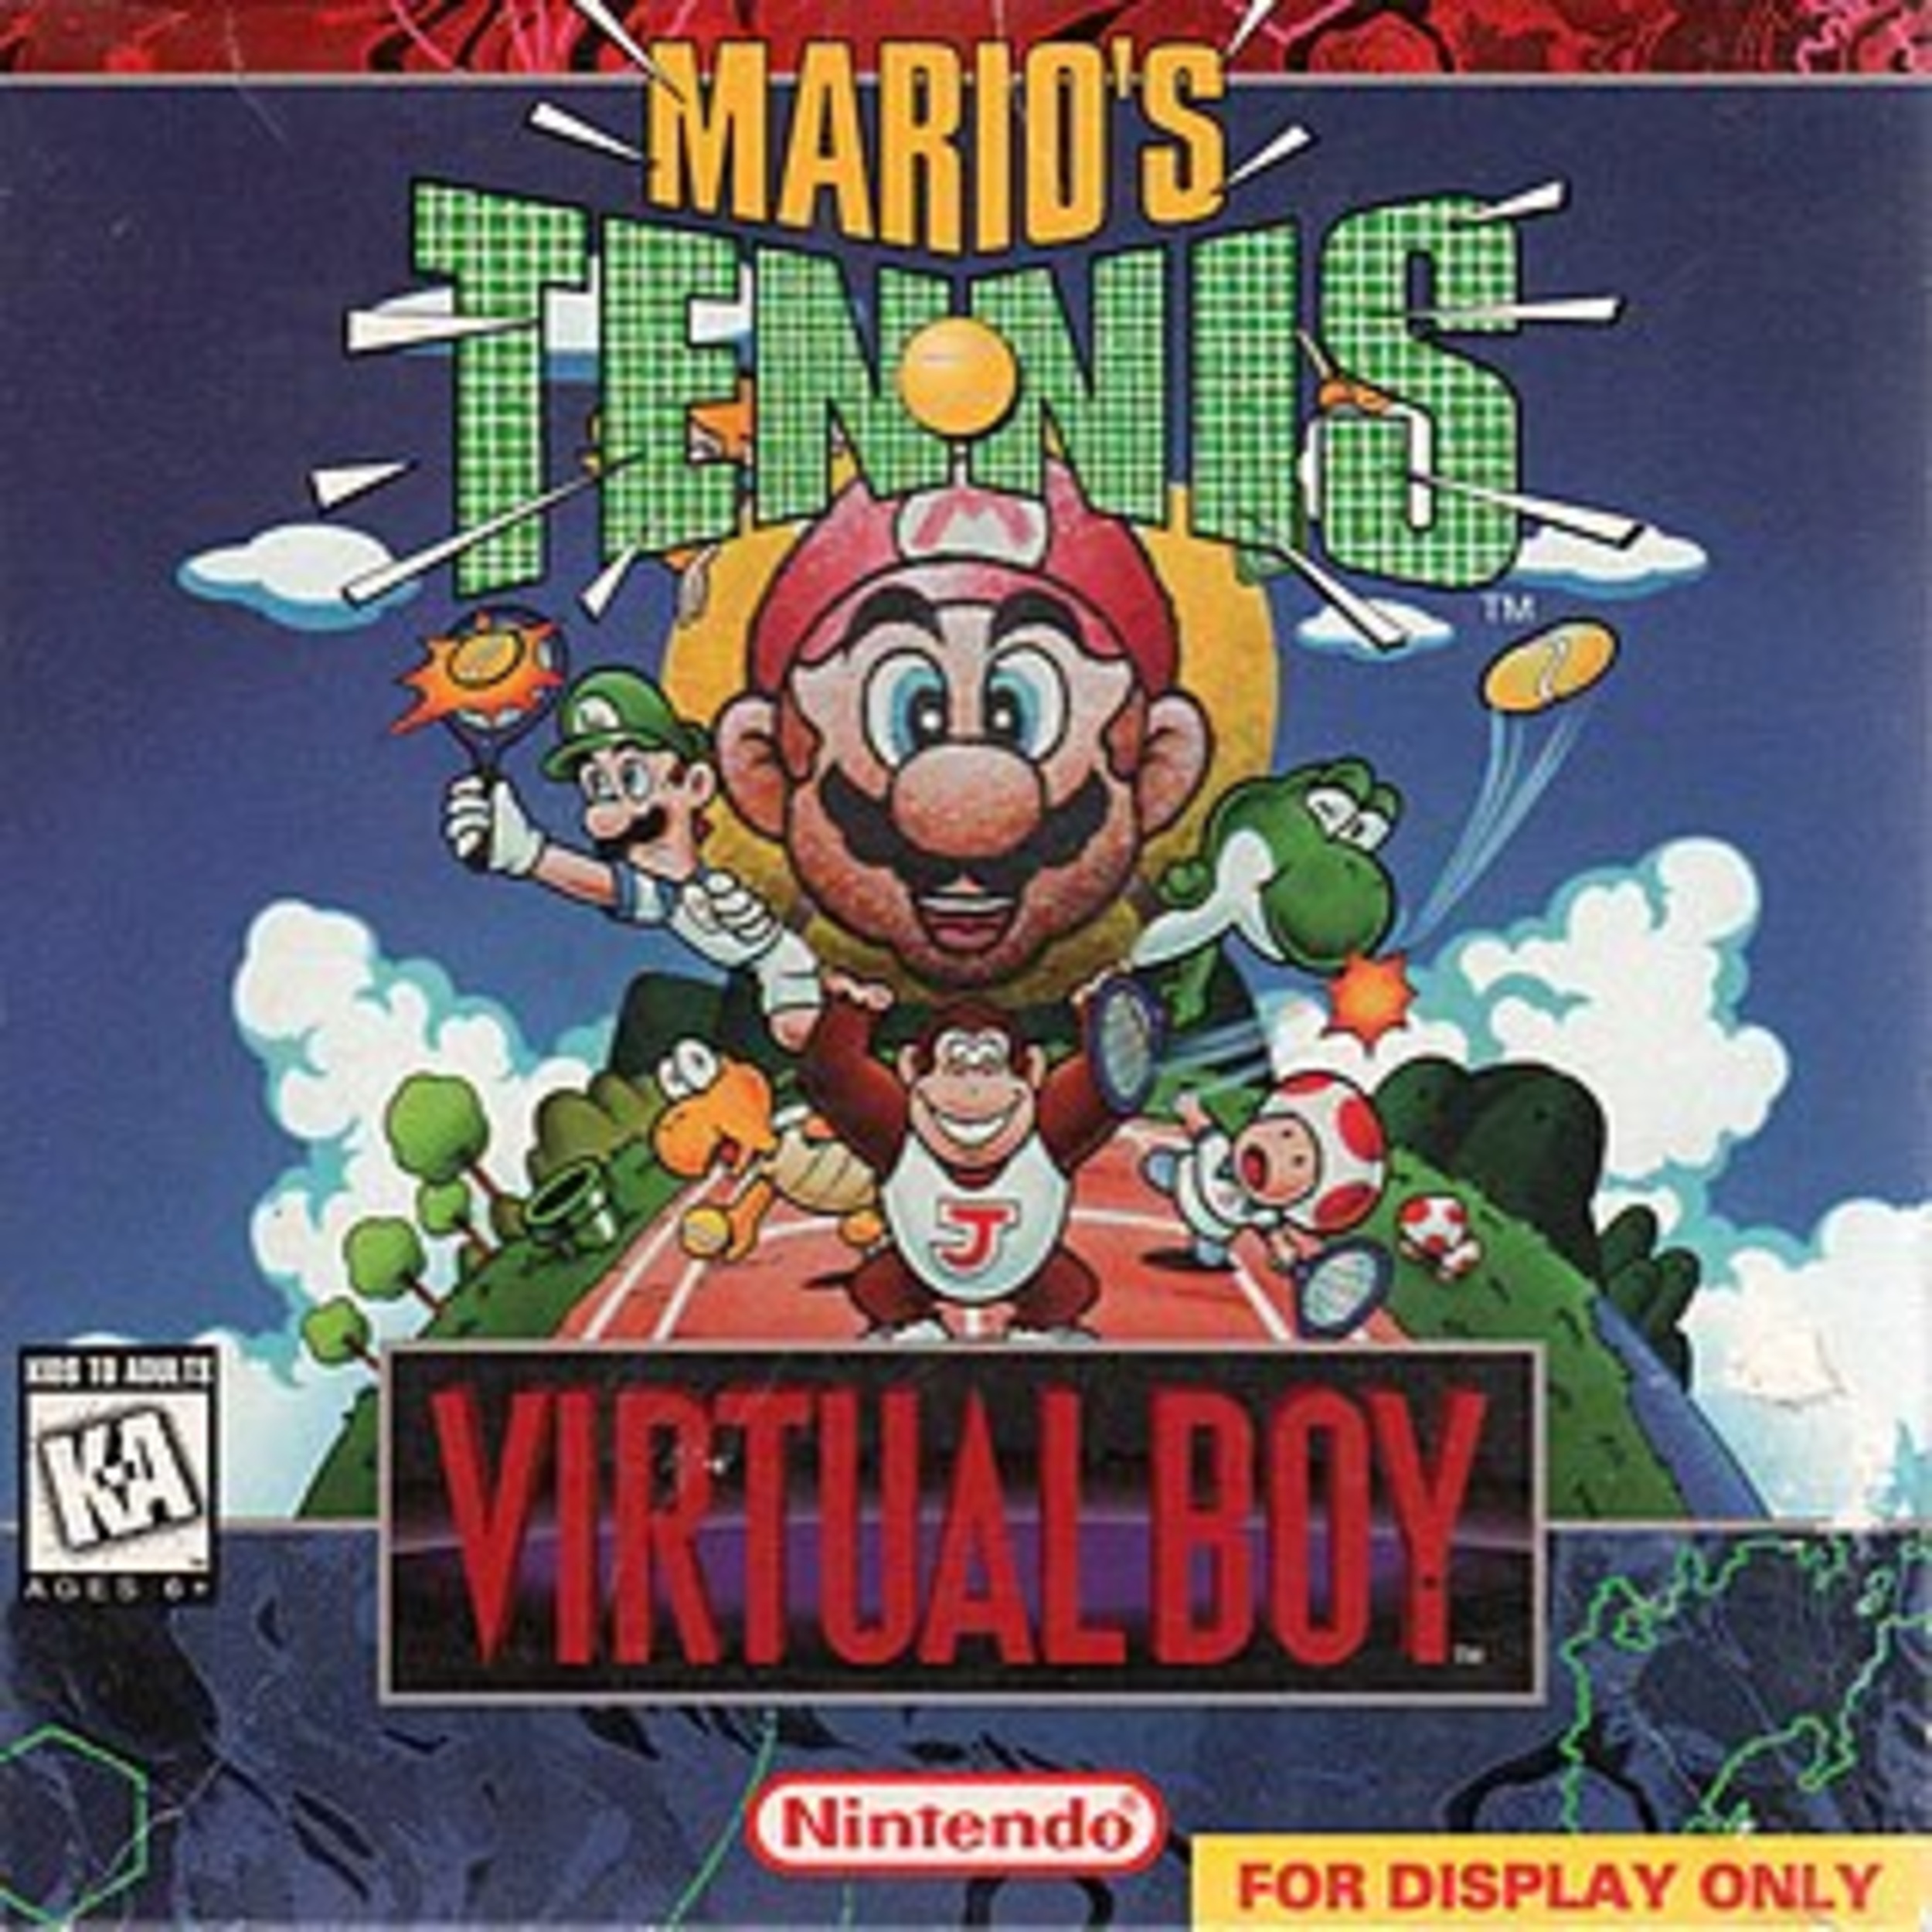 <p>This entire feature could be filled with games from Nintendo's biggest console bomb, but since we only have time for one, <em>Mario's Tennis </em>stands out (or down).<br><br>Even if you look past that it's not the kind of Mario game players wanted back then, <em>Mario's Tennis</em> feels like watching a tennis game if you burned out your retinas and can only see red. The Virtual Boy attempted to stay ahead of competitors by offering a "virtual" headset with 3D graphics that didn't require a TV, but it put Nintendo way behind, and <em>Mario's Tennis</em> was a bare-bones tennis game, except you could play as Mario characters. A Mario game on the Virtual Boy where your favorite characters work as office temps would be more engaging and original than a forced perspective tennis clone. </p><p>You may also like: <a href='https://www.yardbarker.com/entertainment/articles/steven_spielbergs_20_best_movies_ranked_022324/s1__38134707'>Steven Spielberg's 20 best movies, ranked</a></p>